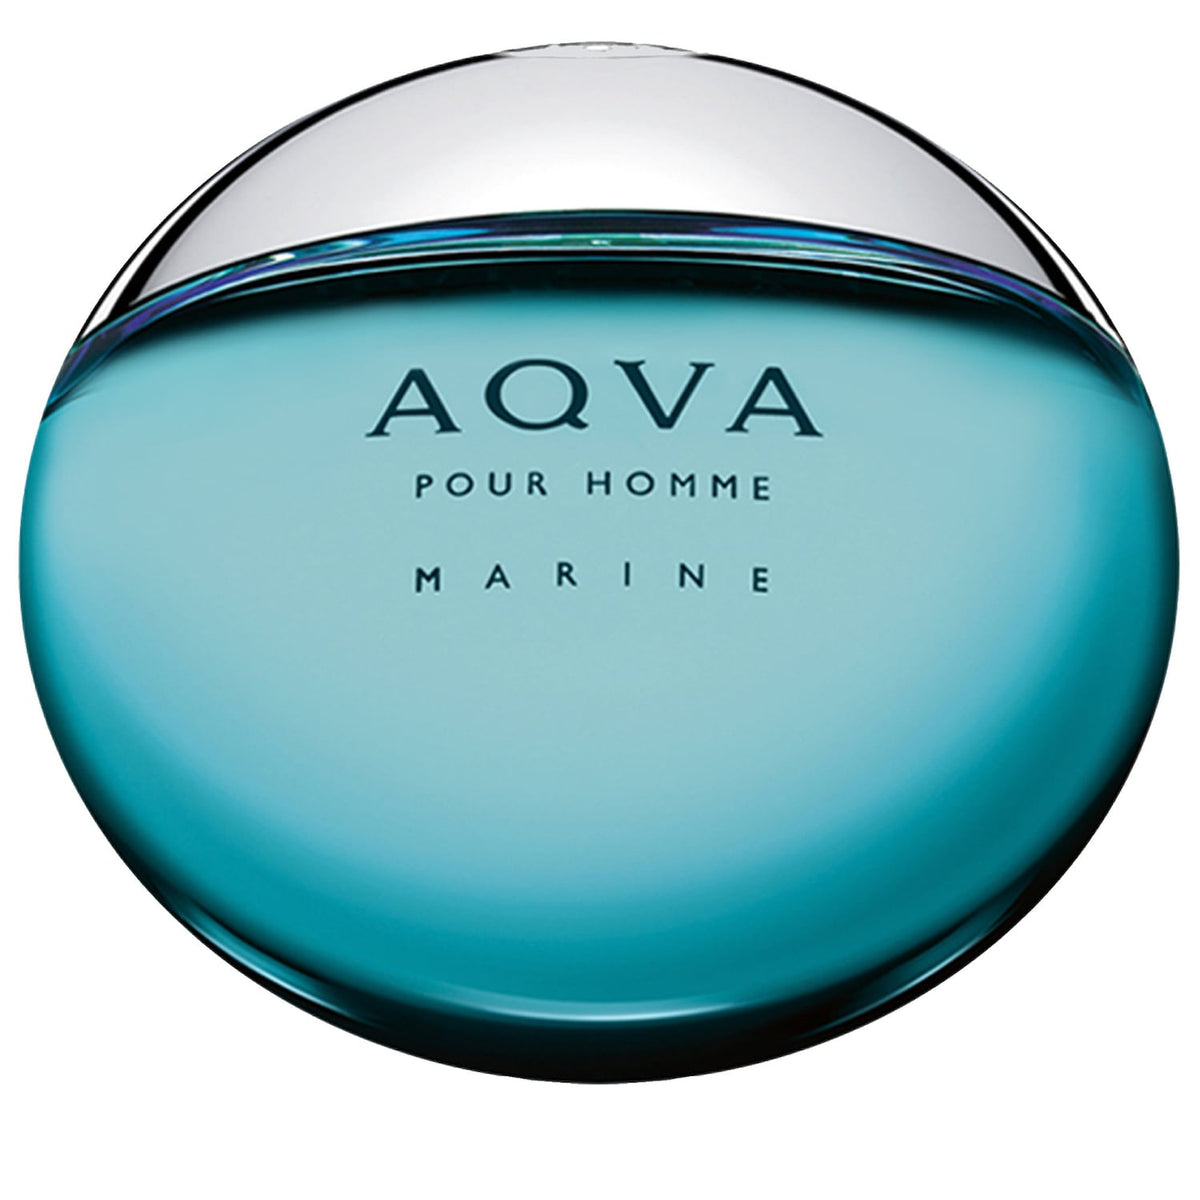 Aqva Marine Pour Homme By Bvlgari Fragrance Samples DecantX, 42% OFF